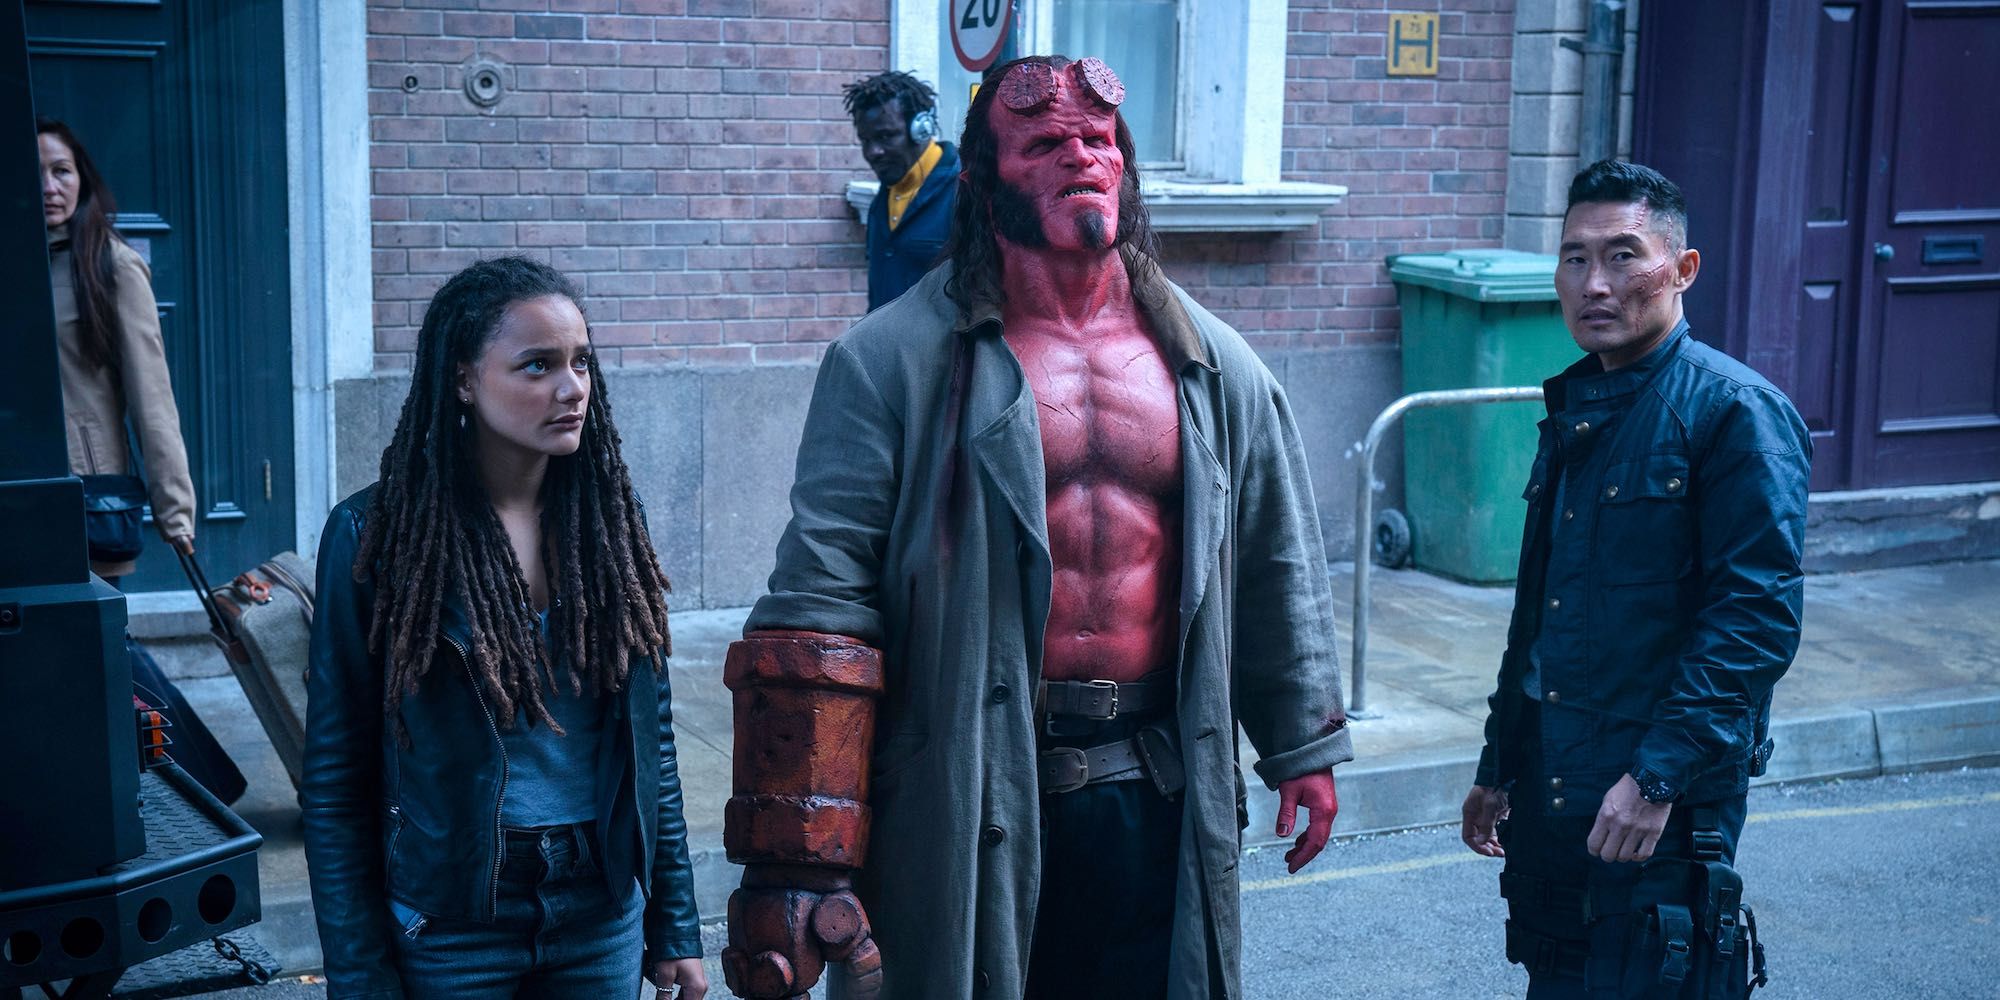 Hellboy Reboot Box Office Projections Lower Than Original Films